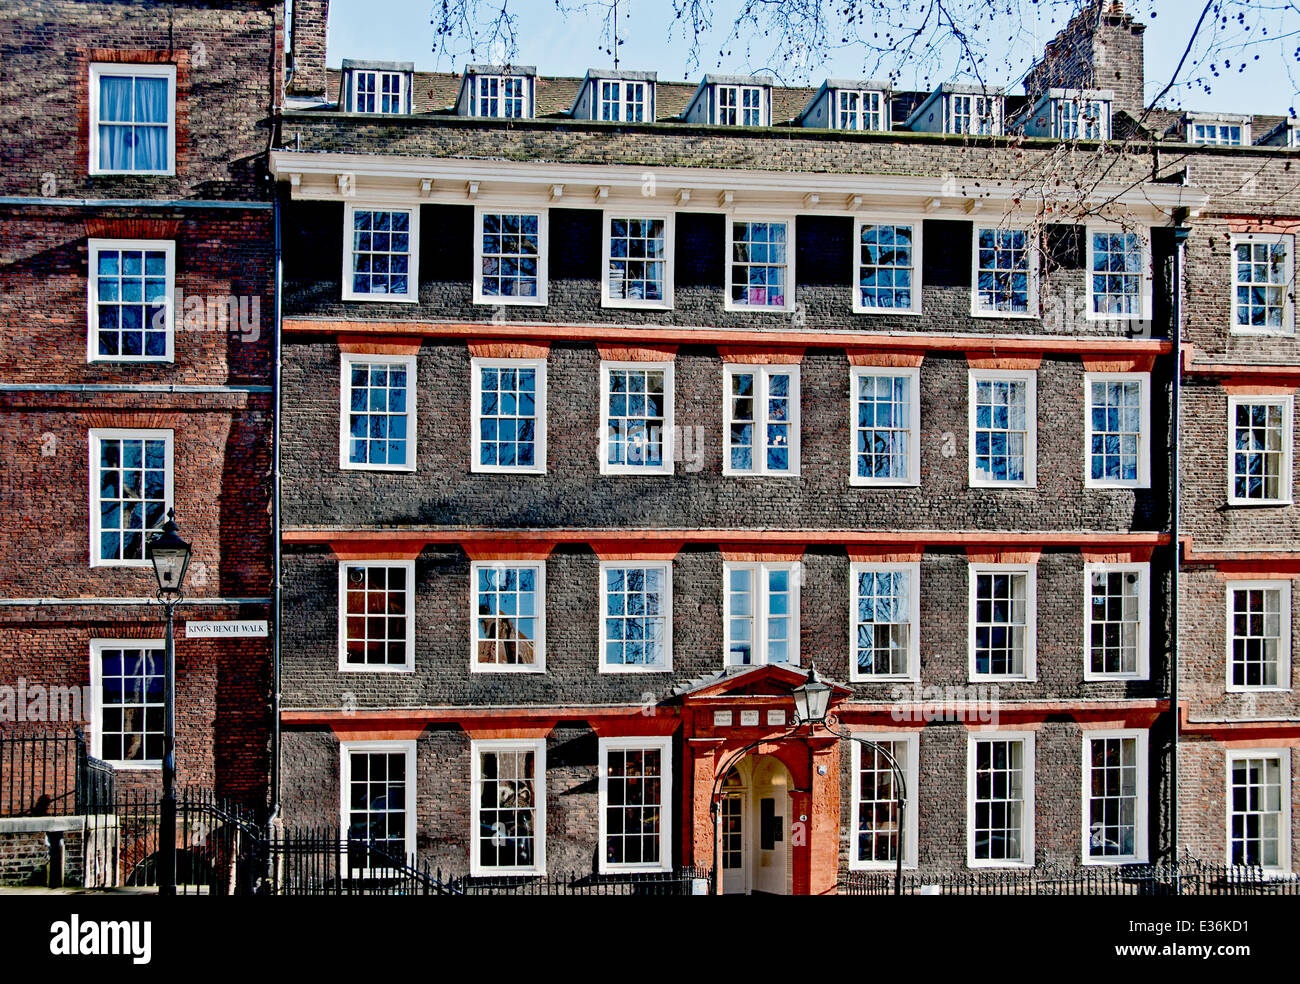 Inns of the Court. Legal chambers in King's Bench Walk, Middle Temple, London GB Stock Photo